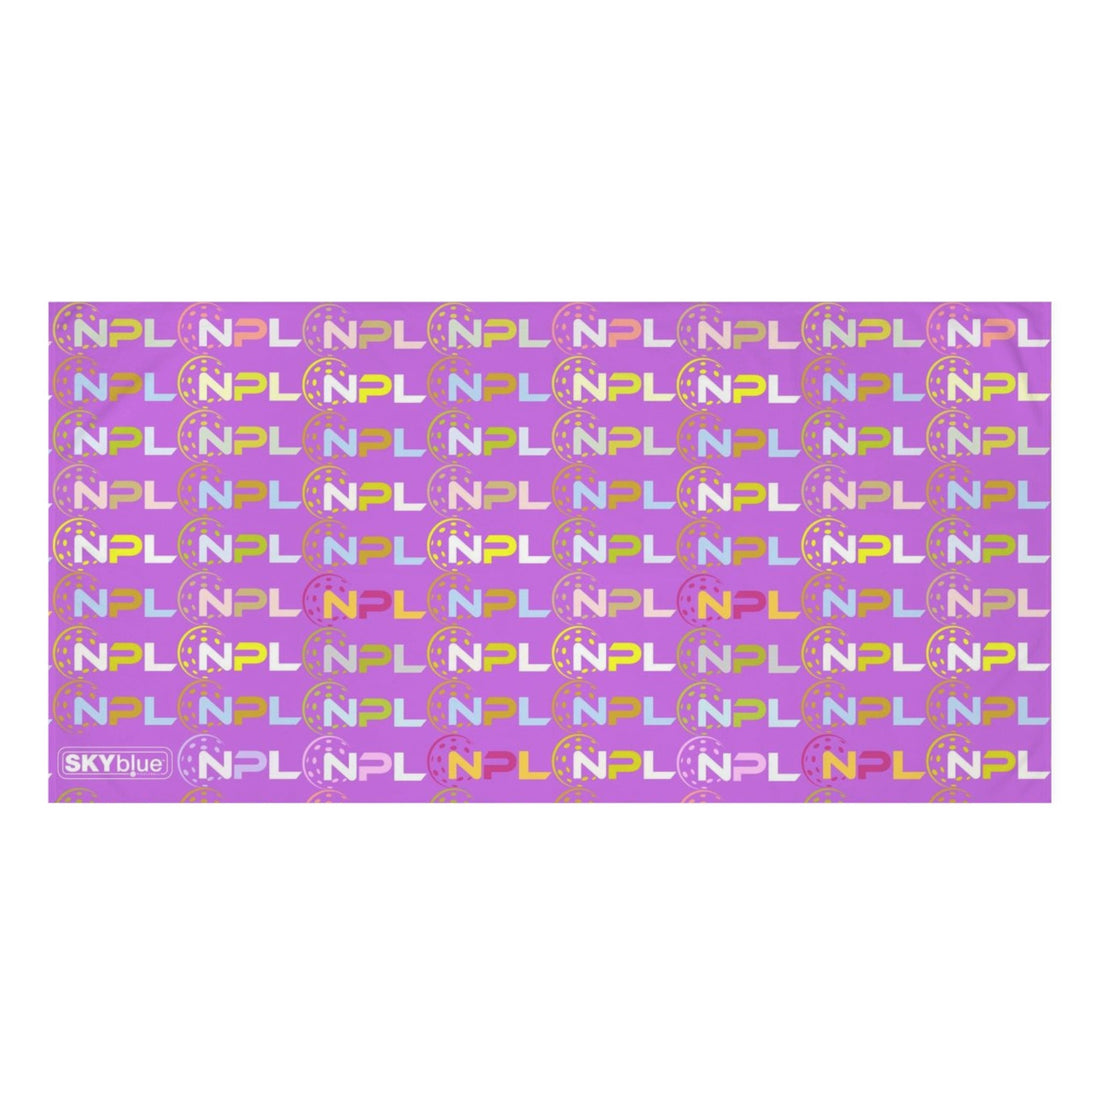 NPL™ Pop-Art Towel 30x60" in Pink - Add Some Color to Your Game!